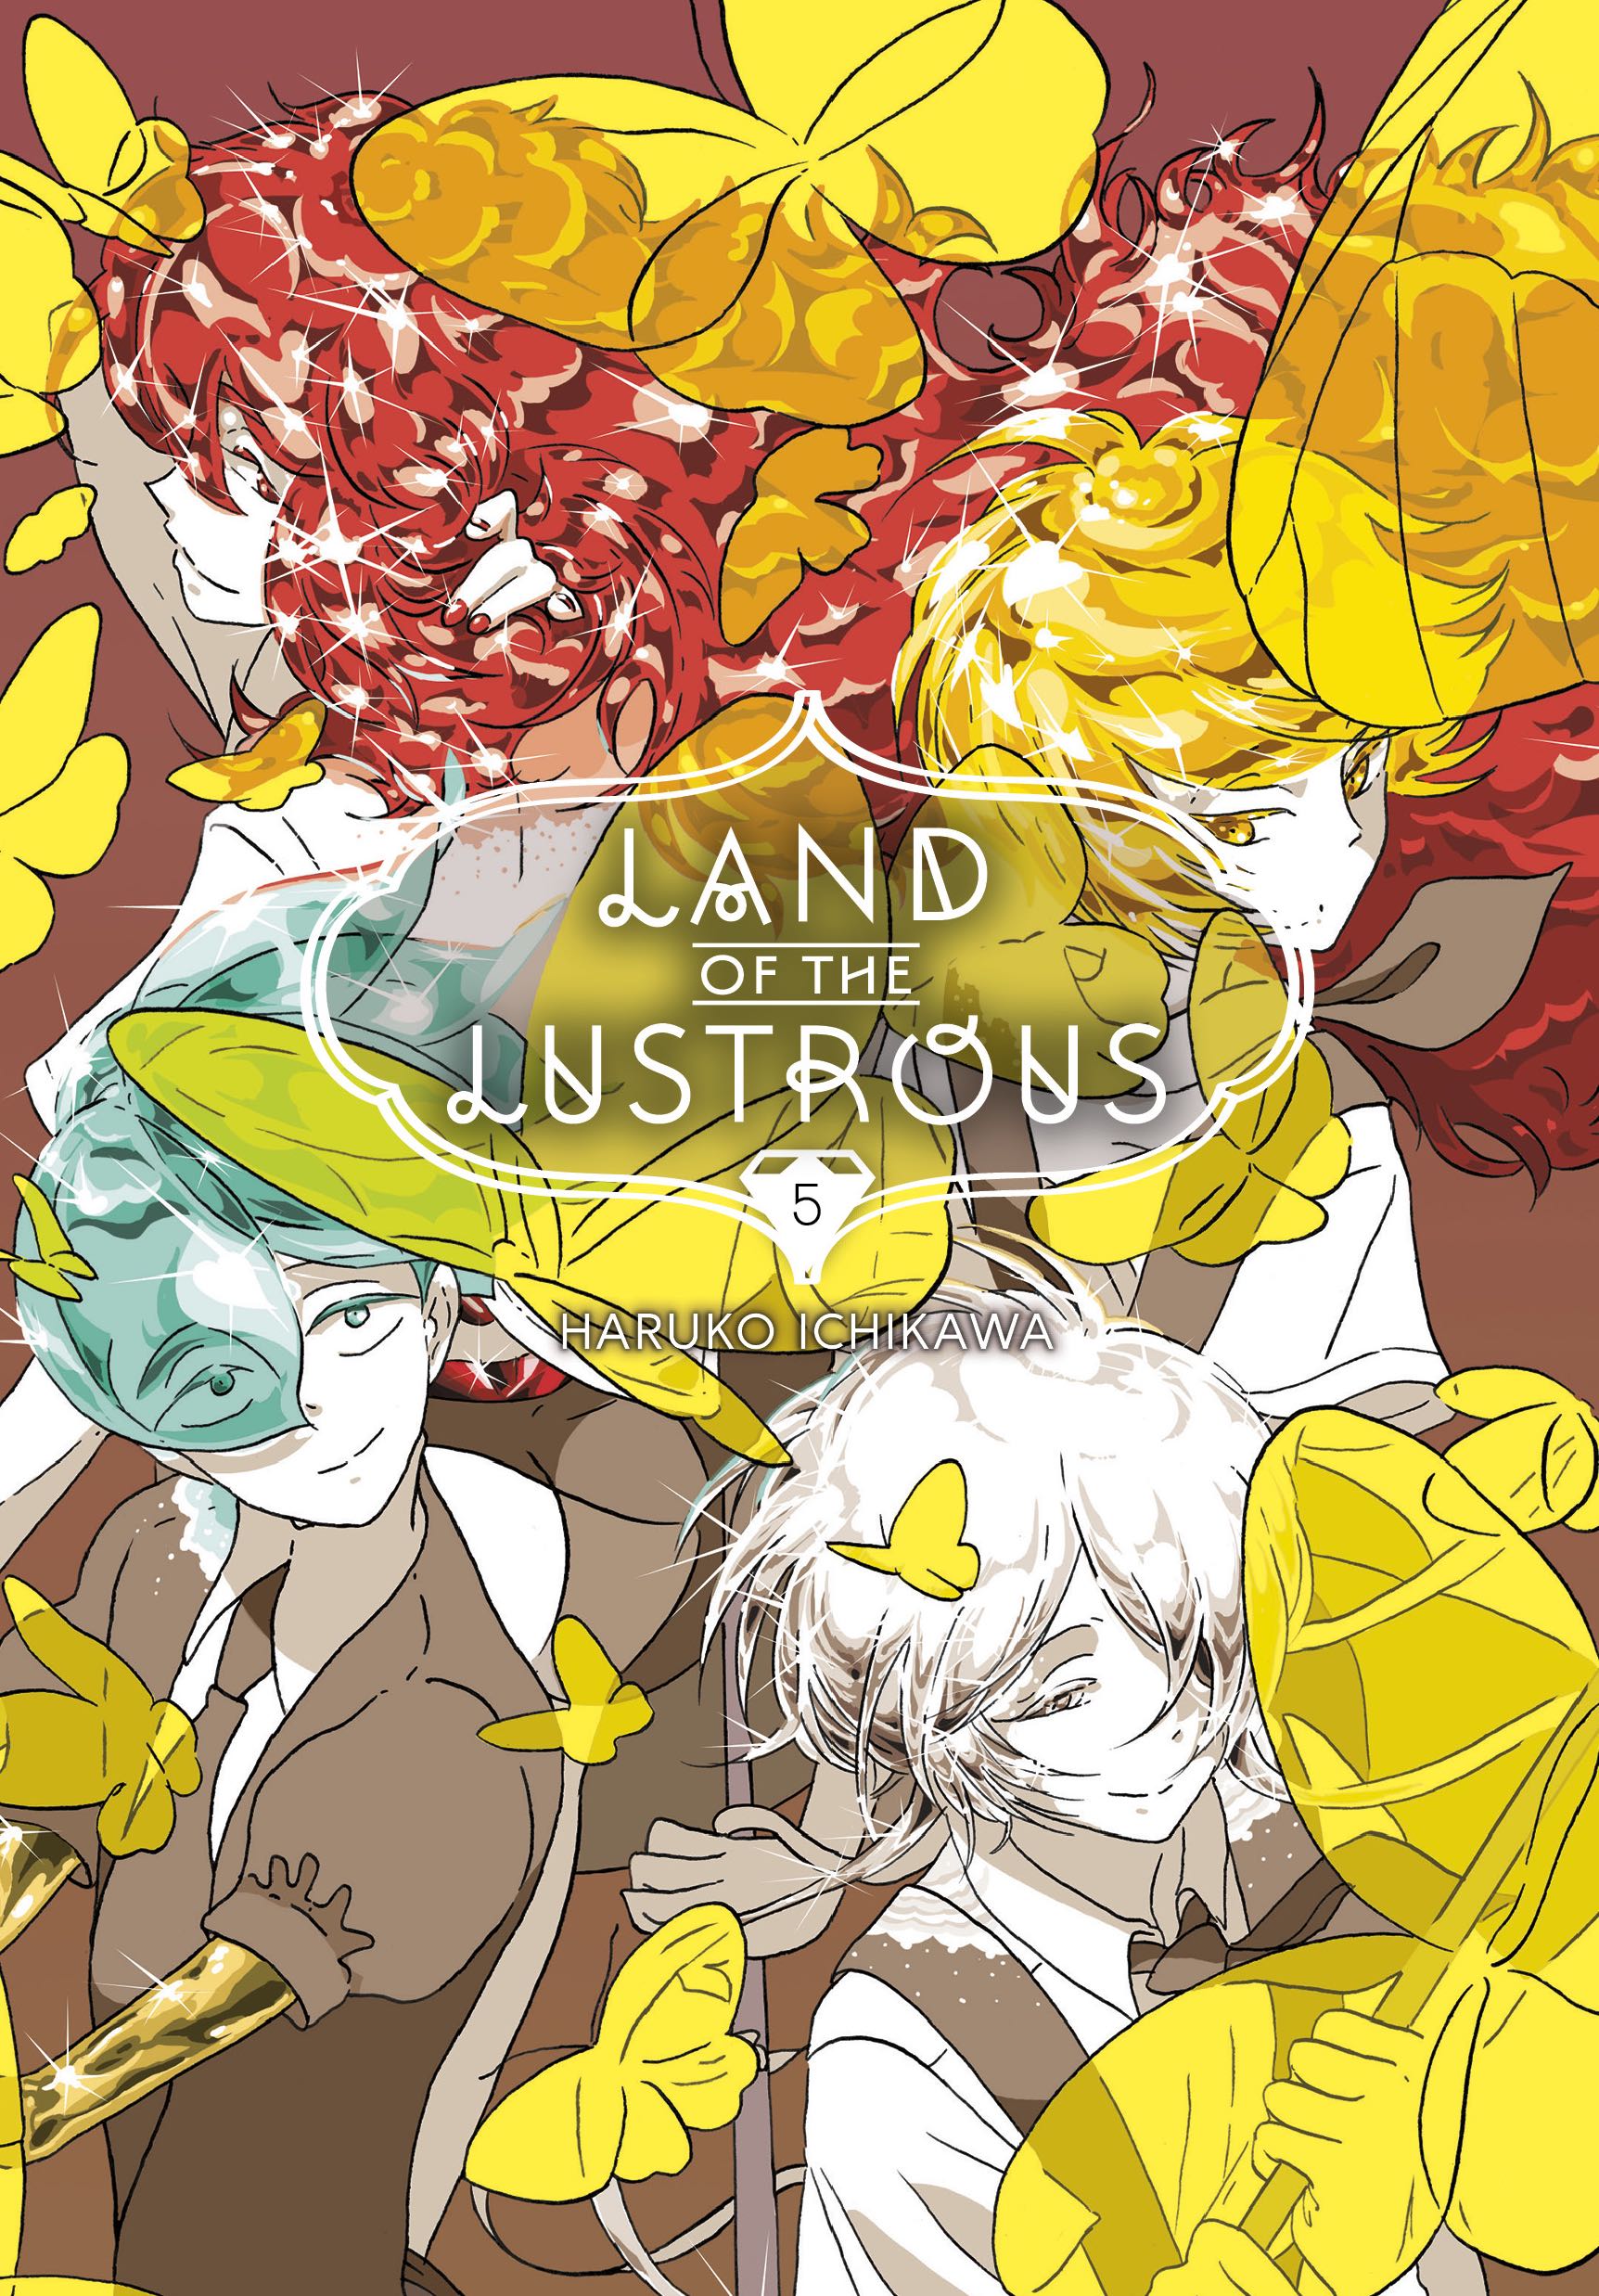 Land of the Lustrous - Volume 5